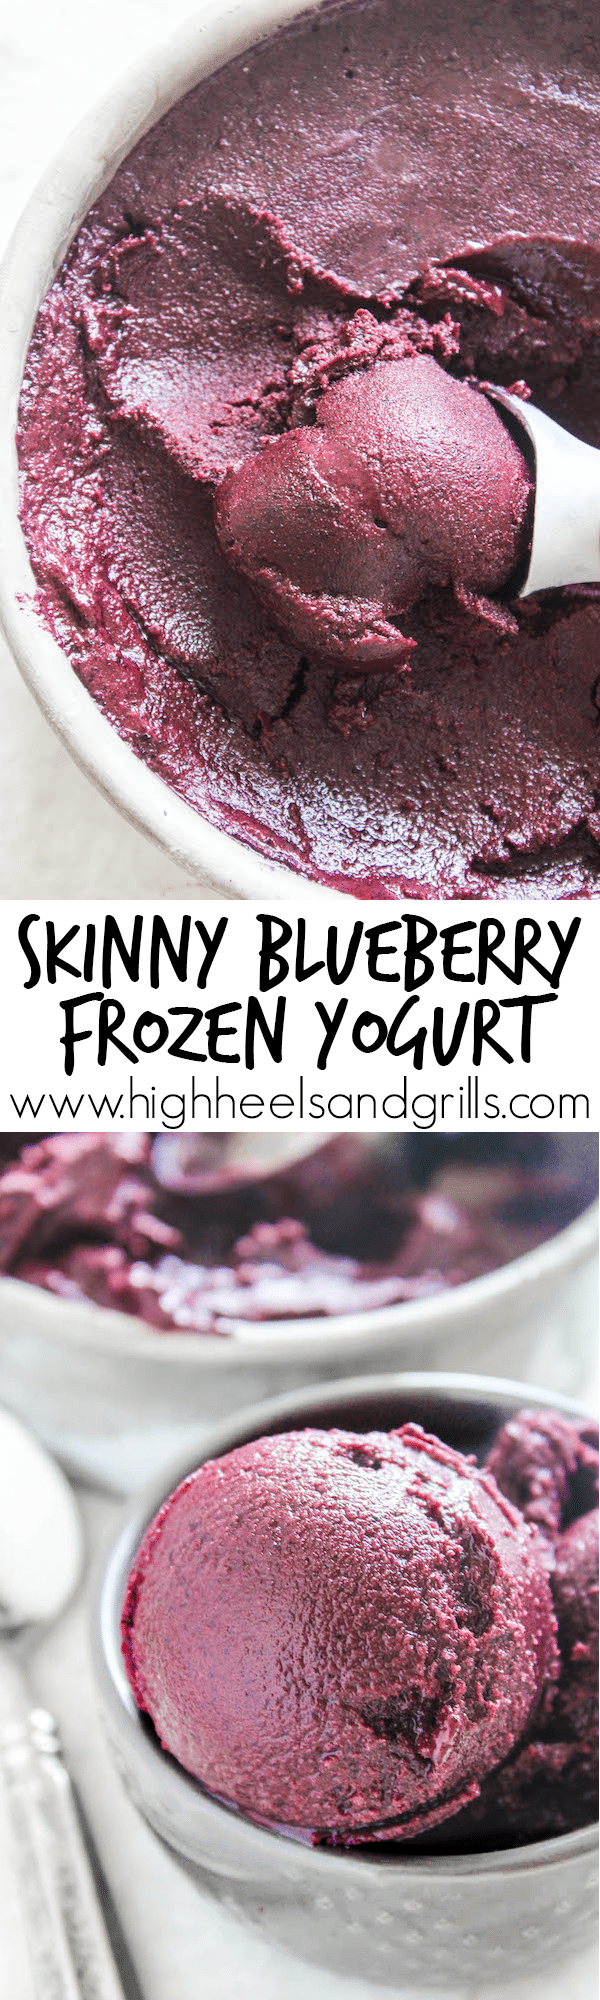 Skinny Blueberry Frozen Yogurt - Blueberries, honey, yogurt, and a squeeze of lemon. Just four ingredients to bring you this delicious dessert!